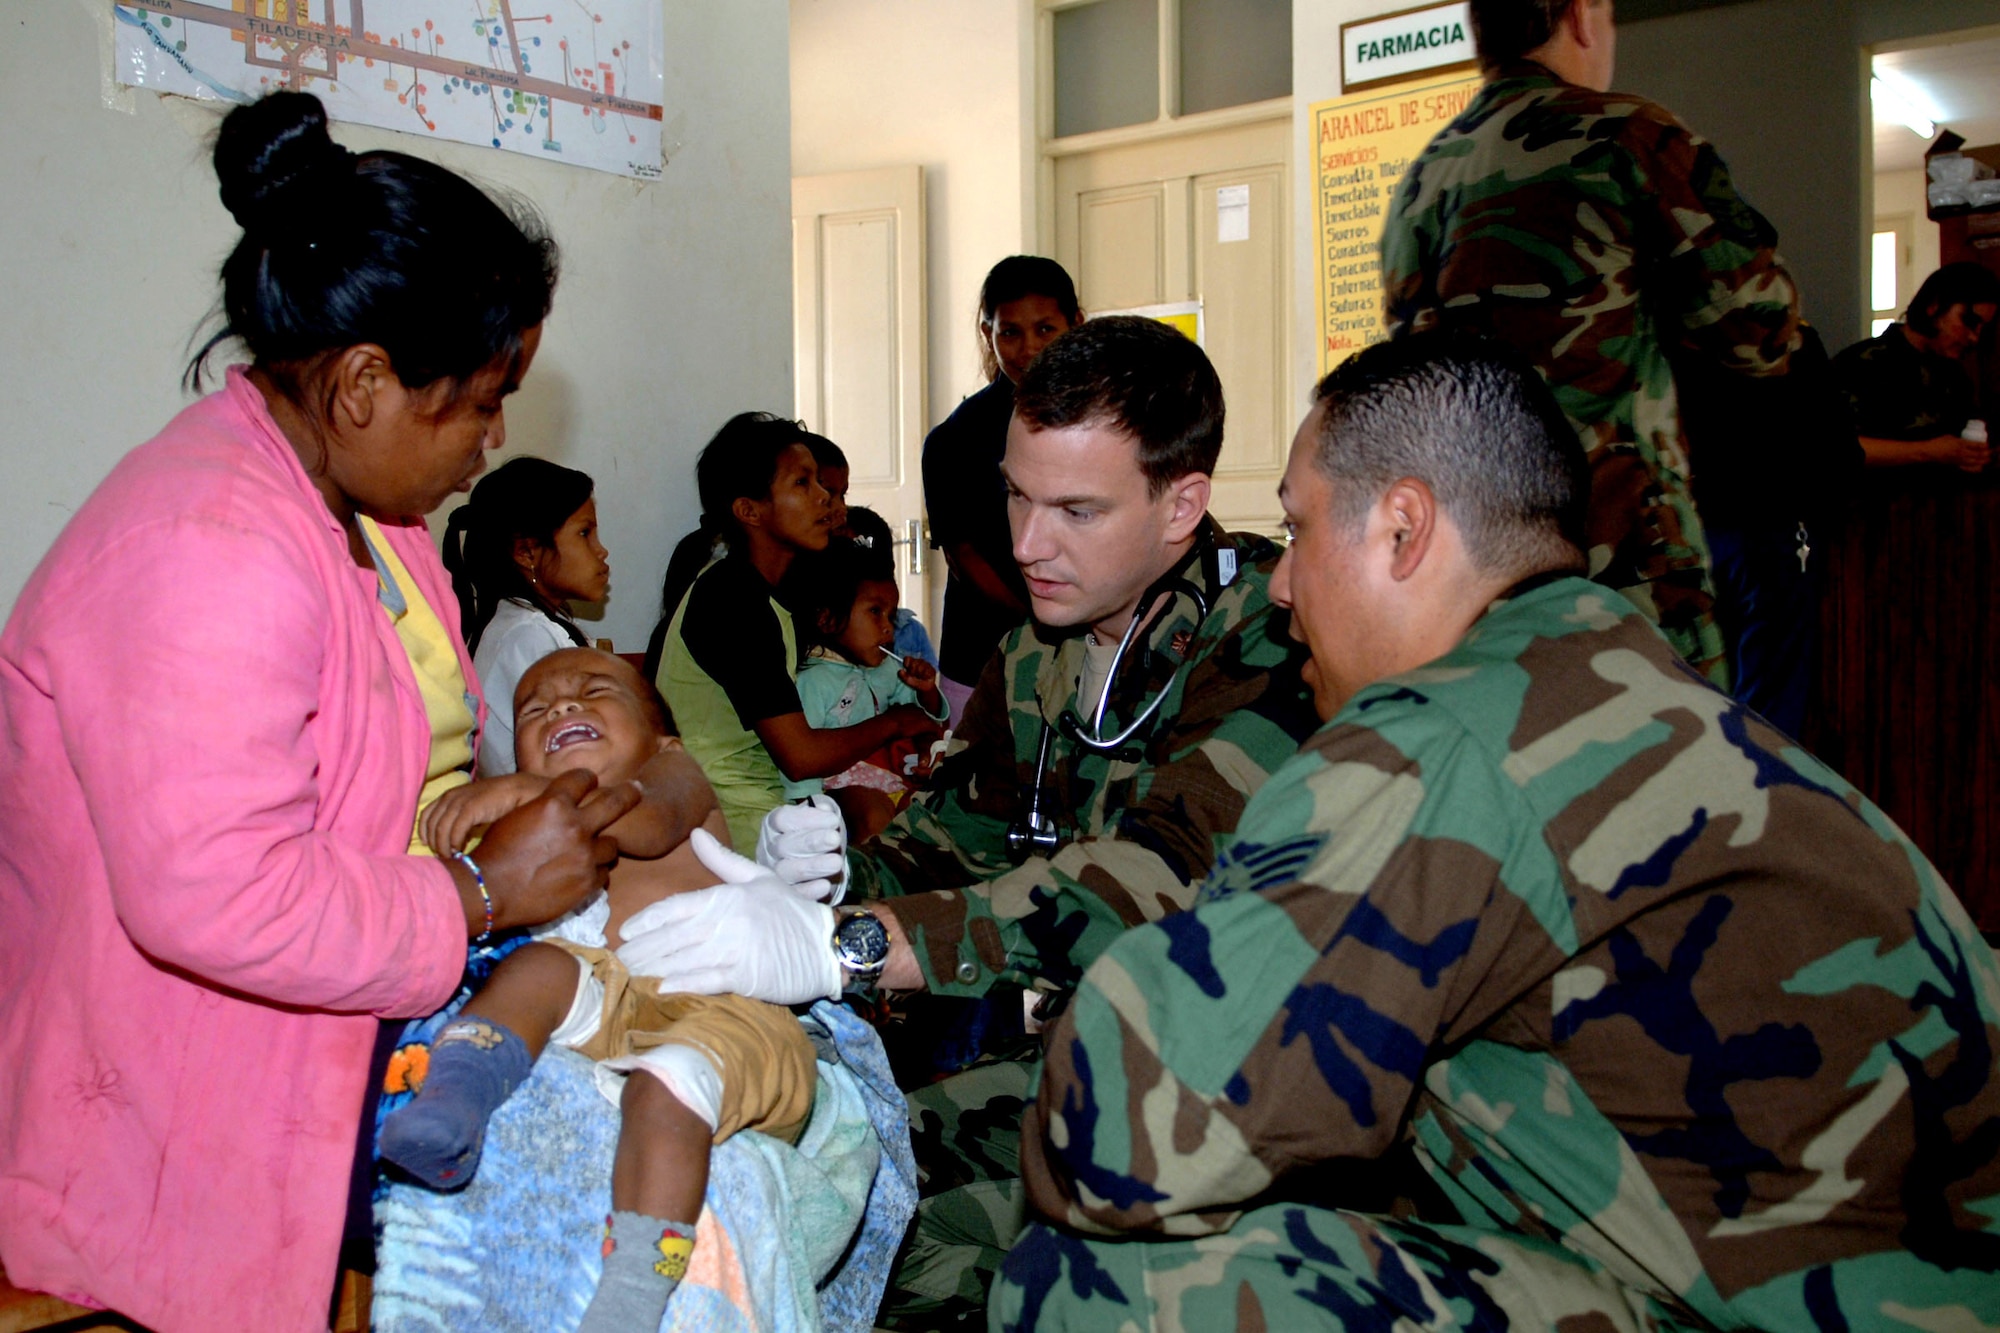 Maj. Scott Shepherd and Senior Airman Felipe Soto treat a 6-month old Bolivian boy who has a fever of 104 degrees during a Medical Readiness Training Exercise in Cobija, Bolivia. The two medics are part of a 30-member medical team in Bolivia treating underserved populations in the country. Major Shephers is assigned to the 152nd Medical Group in Reno, Nev., and Airman Soto is from the 163rd Medical Group. (U.S. Air Force photo)